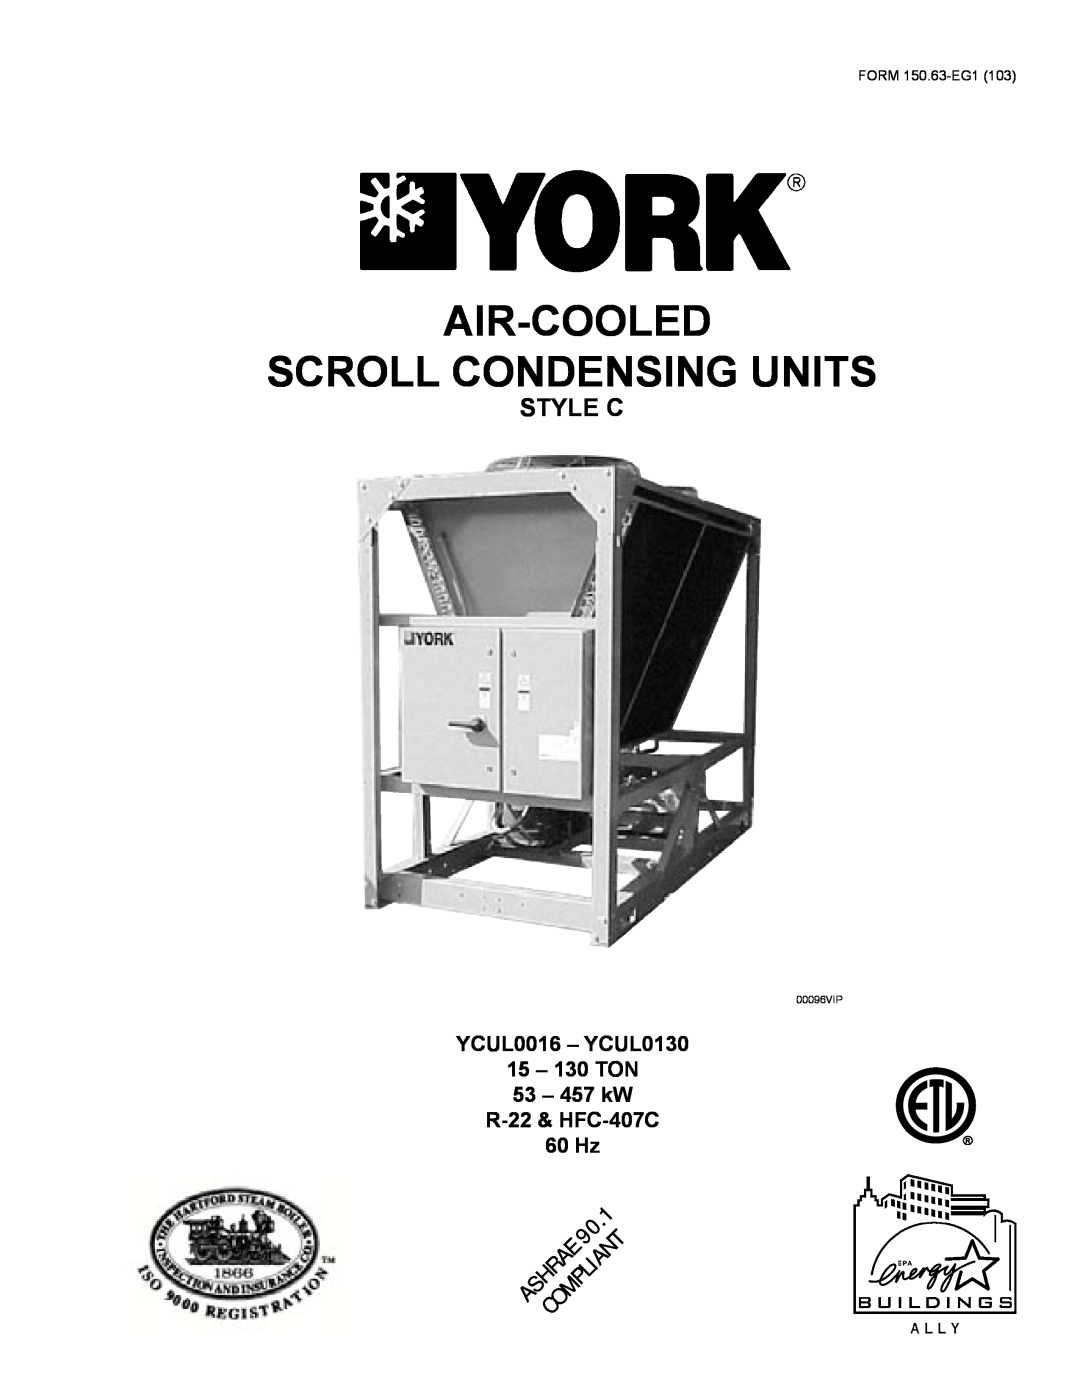 York manual Air-Cooled Scroll Condensing Units, Style C, YCUL0016 – YCUL0130 15 – 130 TON 53 – 457 kW, 00096VIP 